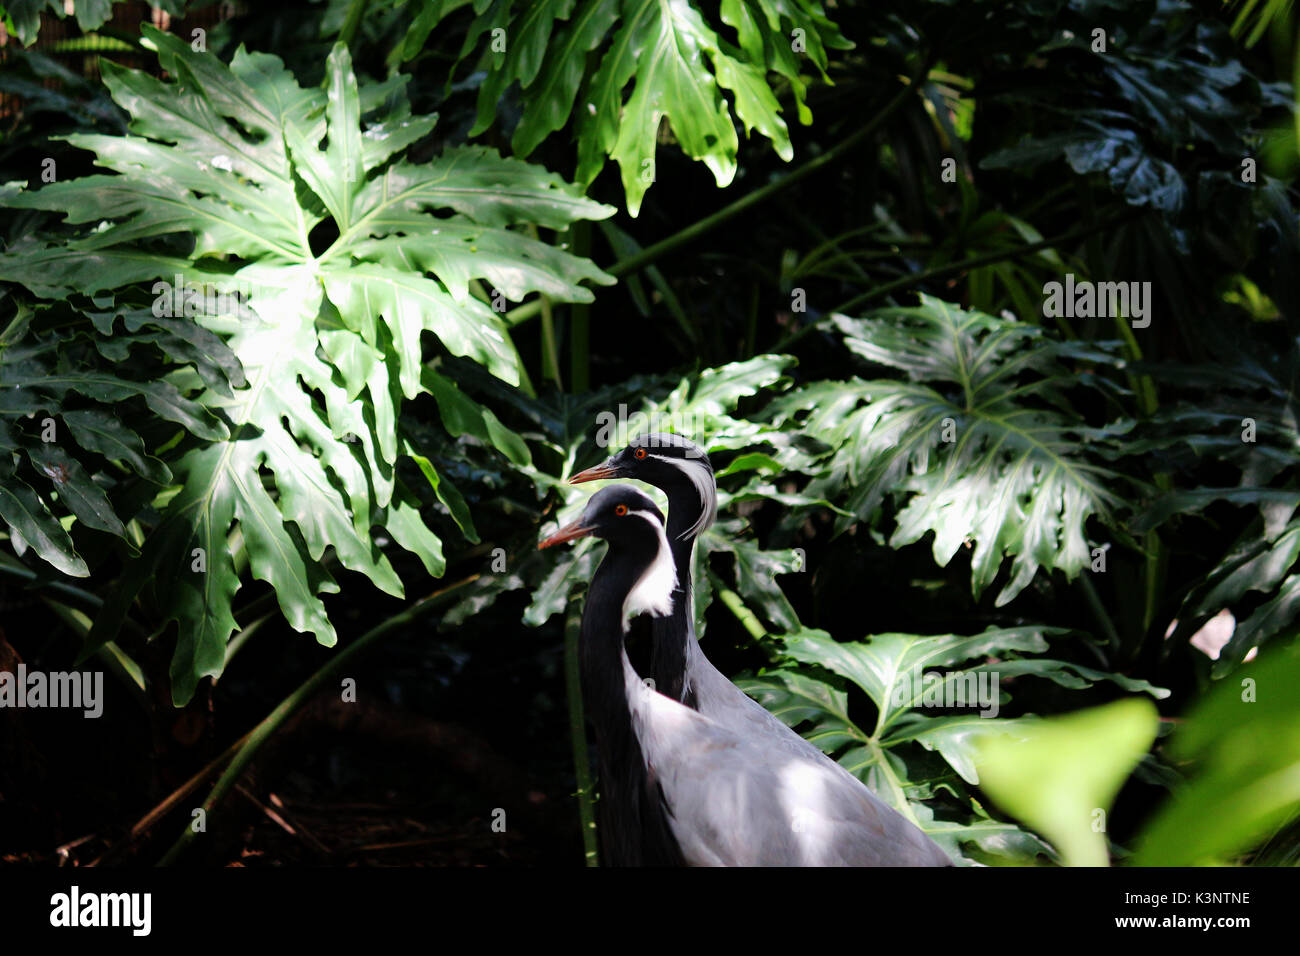 Two Demoiselle cranes hanging out in the dark jungle leaves. Stock Photo